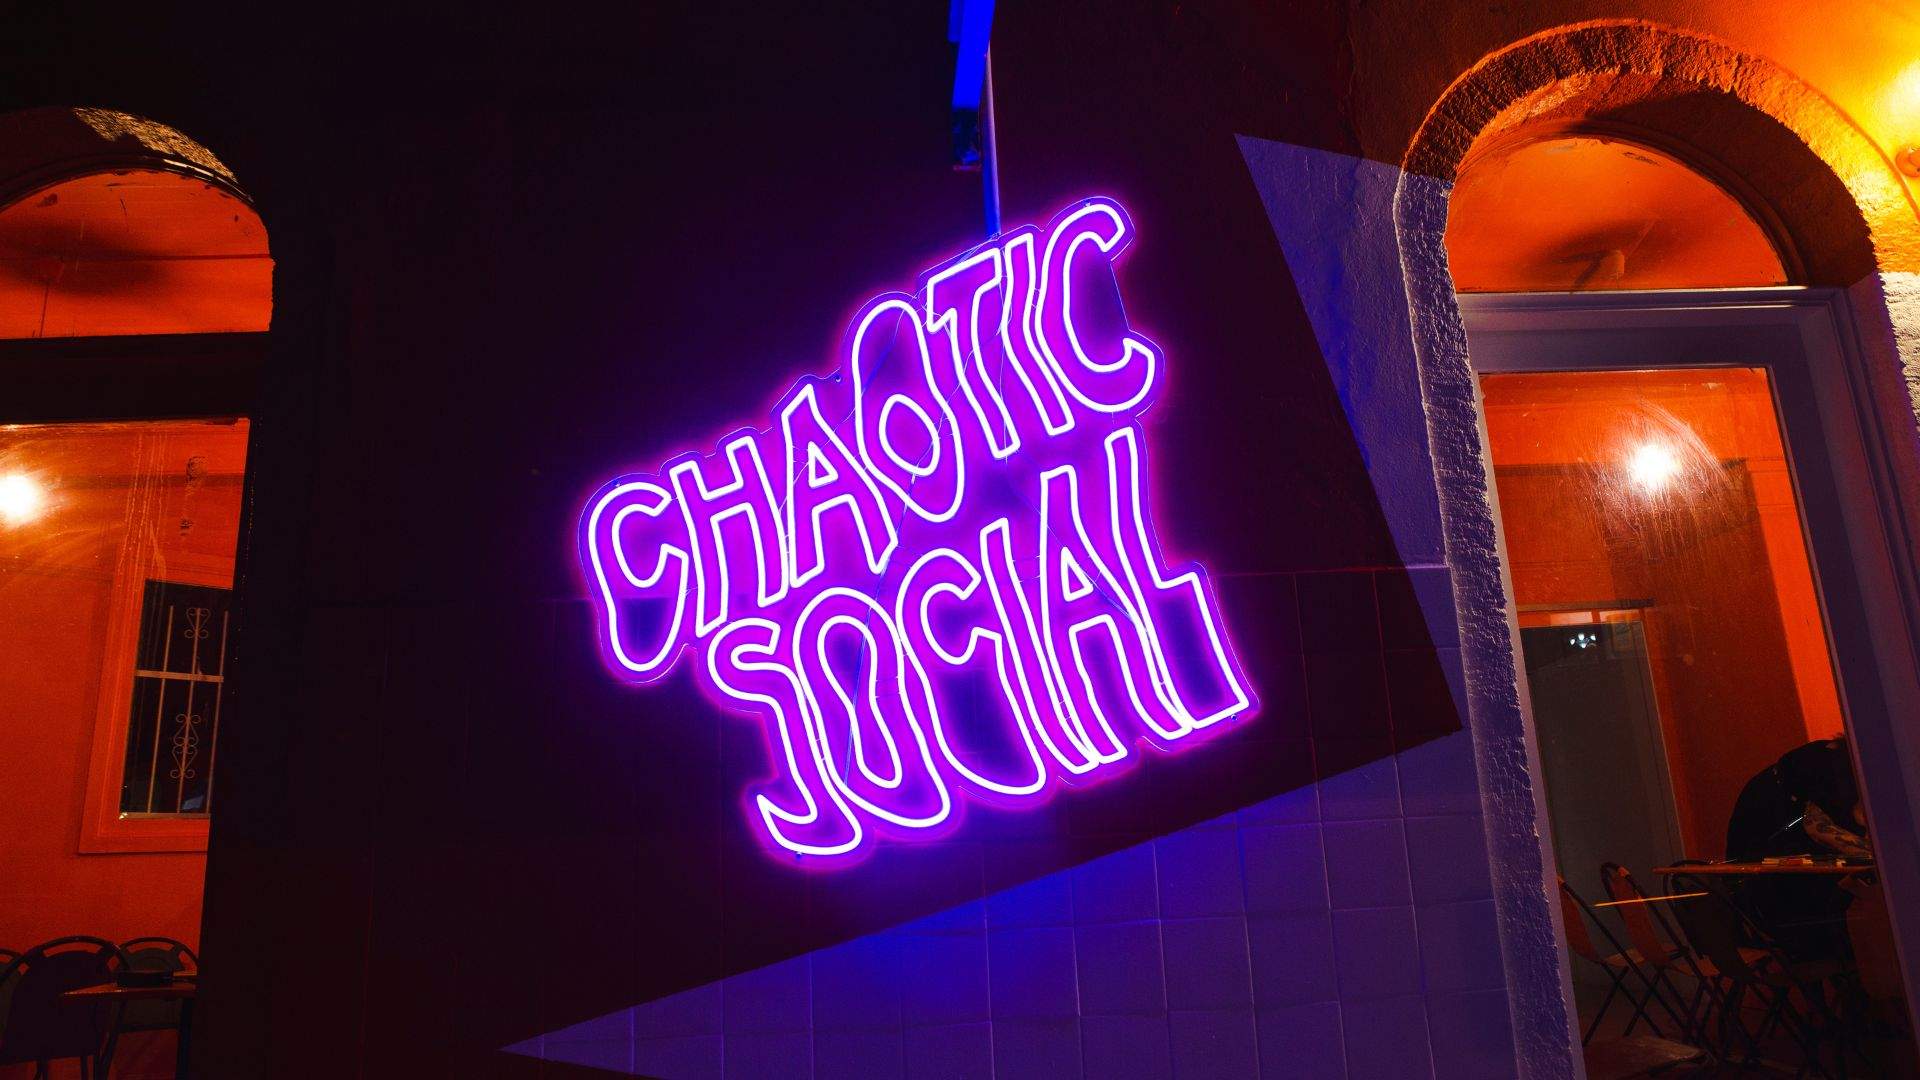 The Newest Way to Network: Chaotic Social Is Chrissy Flanagan's Friendship-Focused Social Club